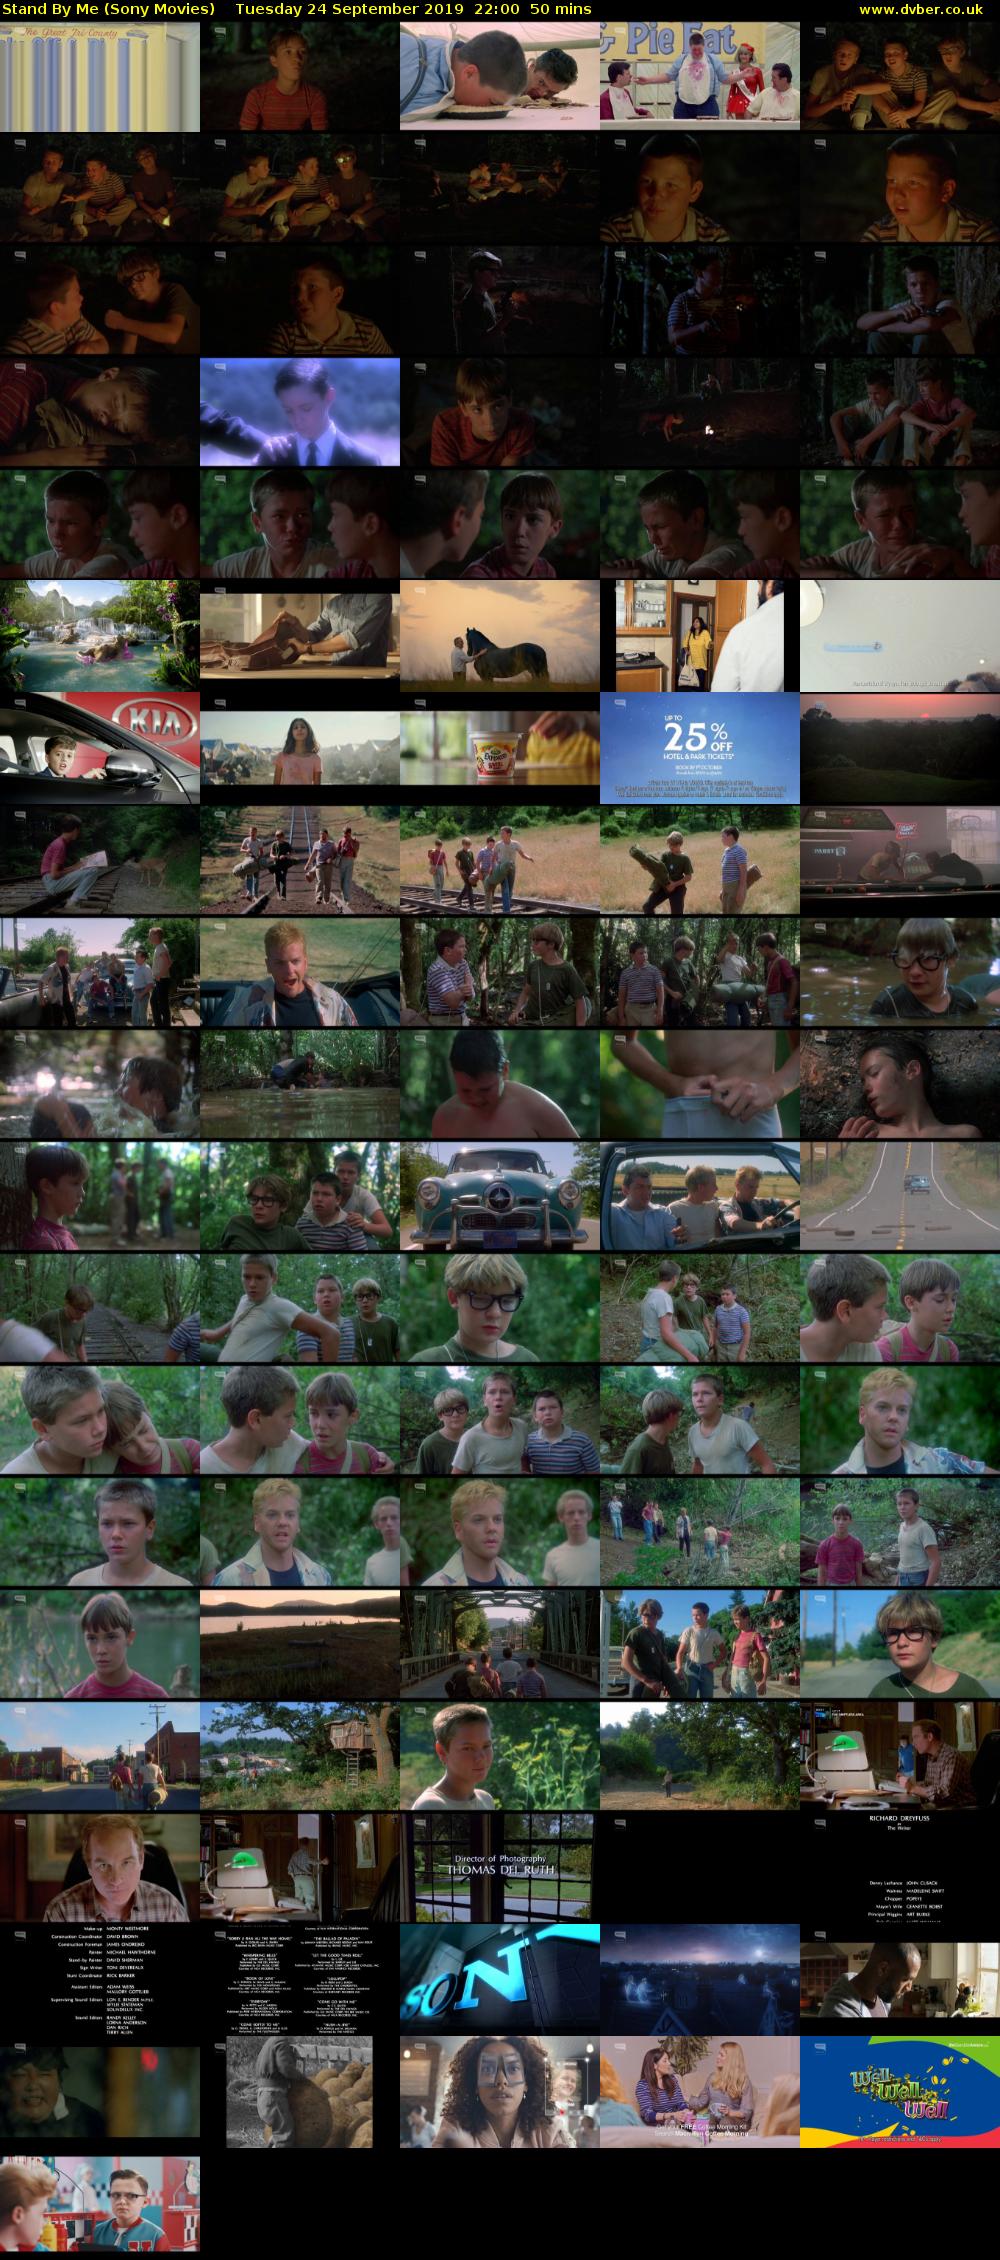 Stand By Me (Sony Movies) Tuesday 24 September 2019 22:00 - 22:50